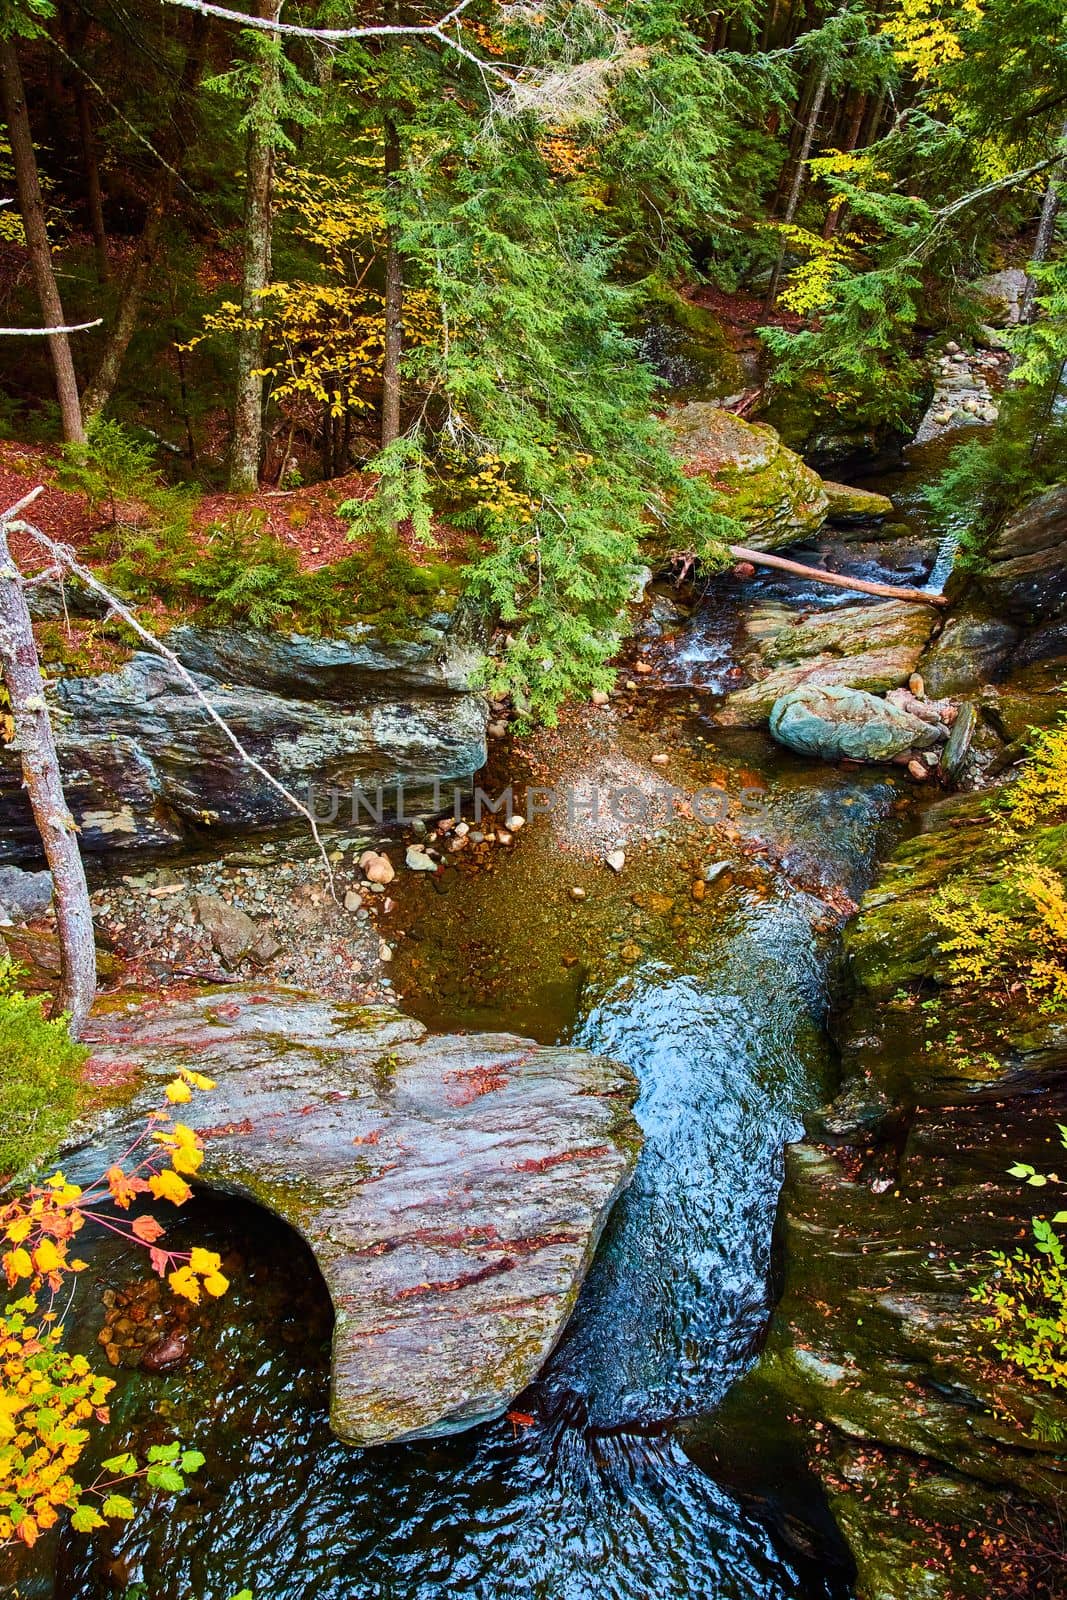 Image of Stunning gorge from above with rocks covered in fall leaves and colorful forest